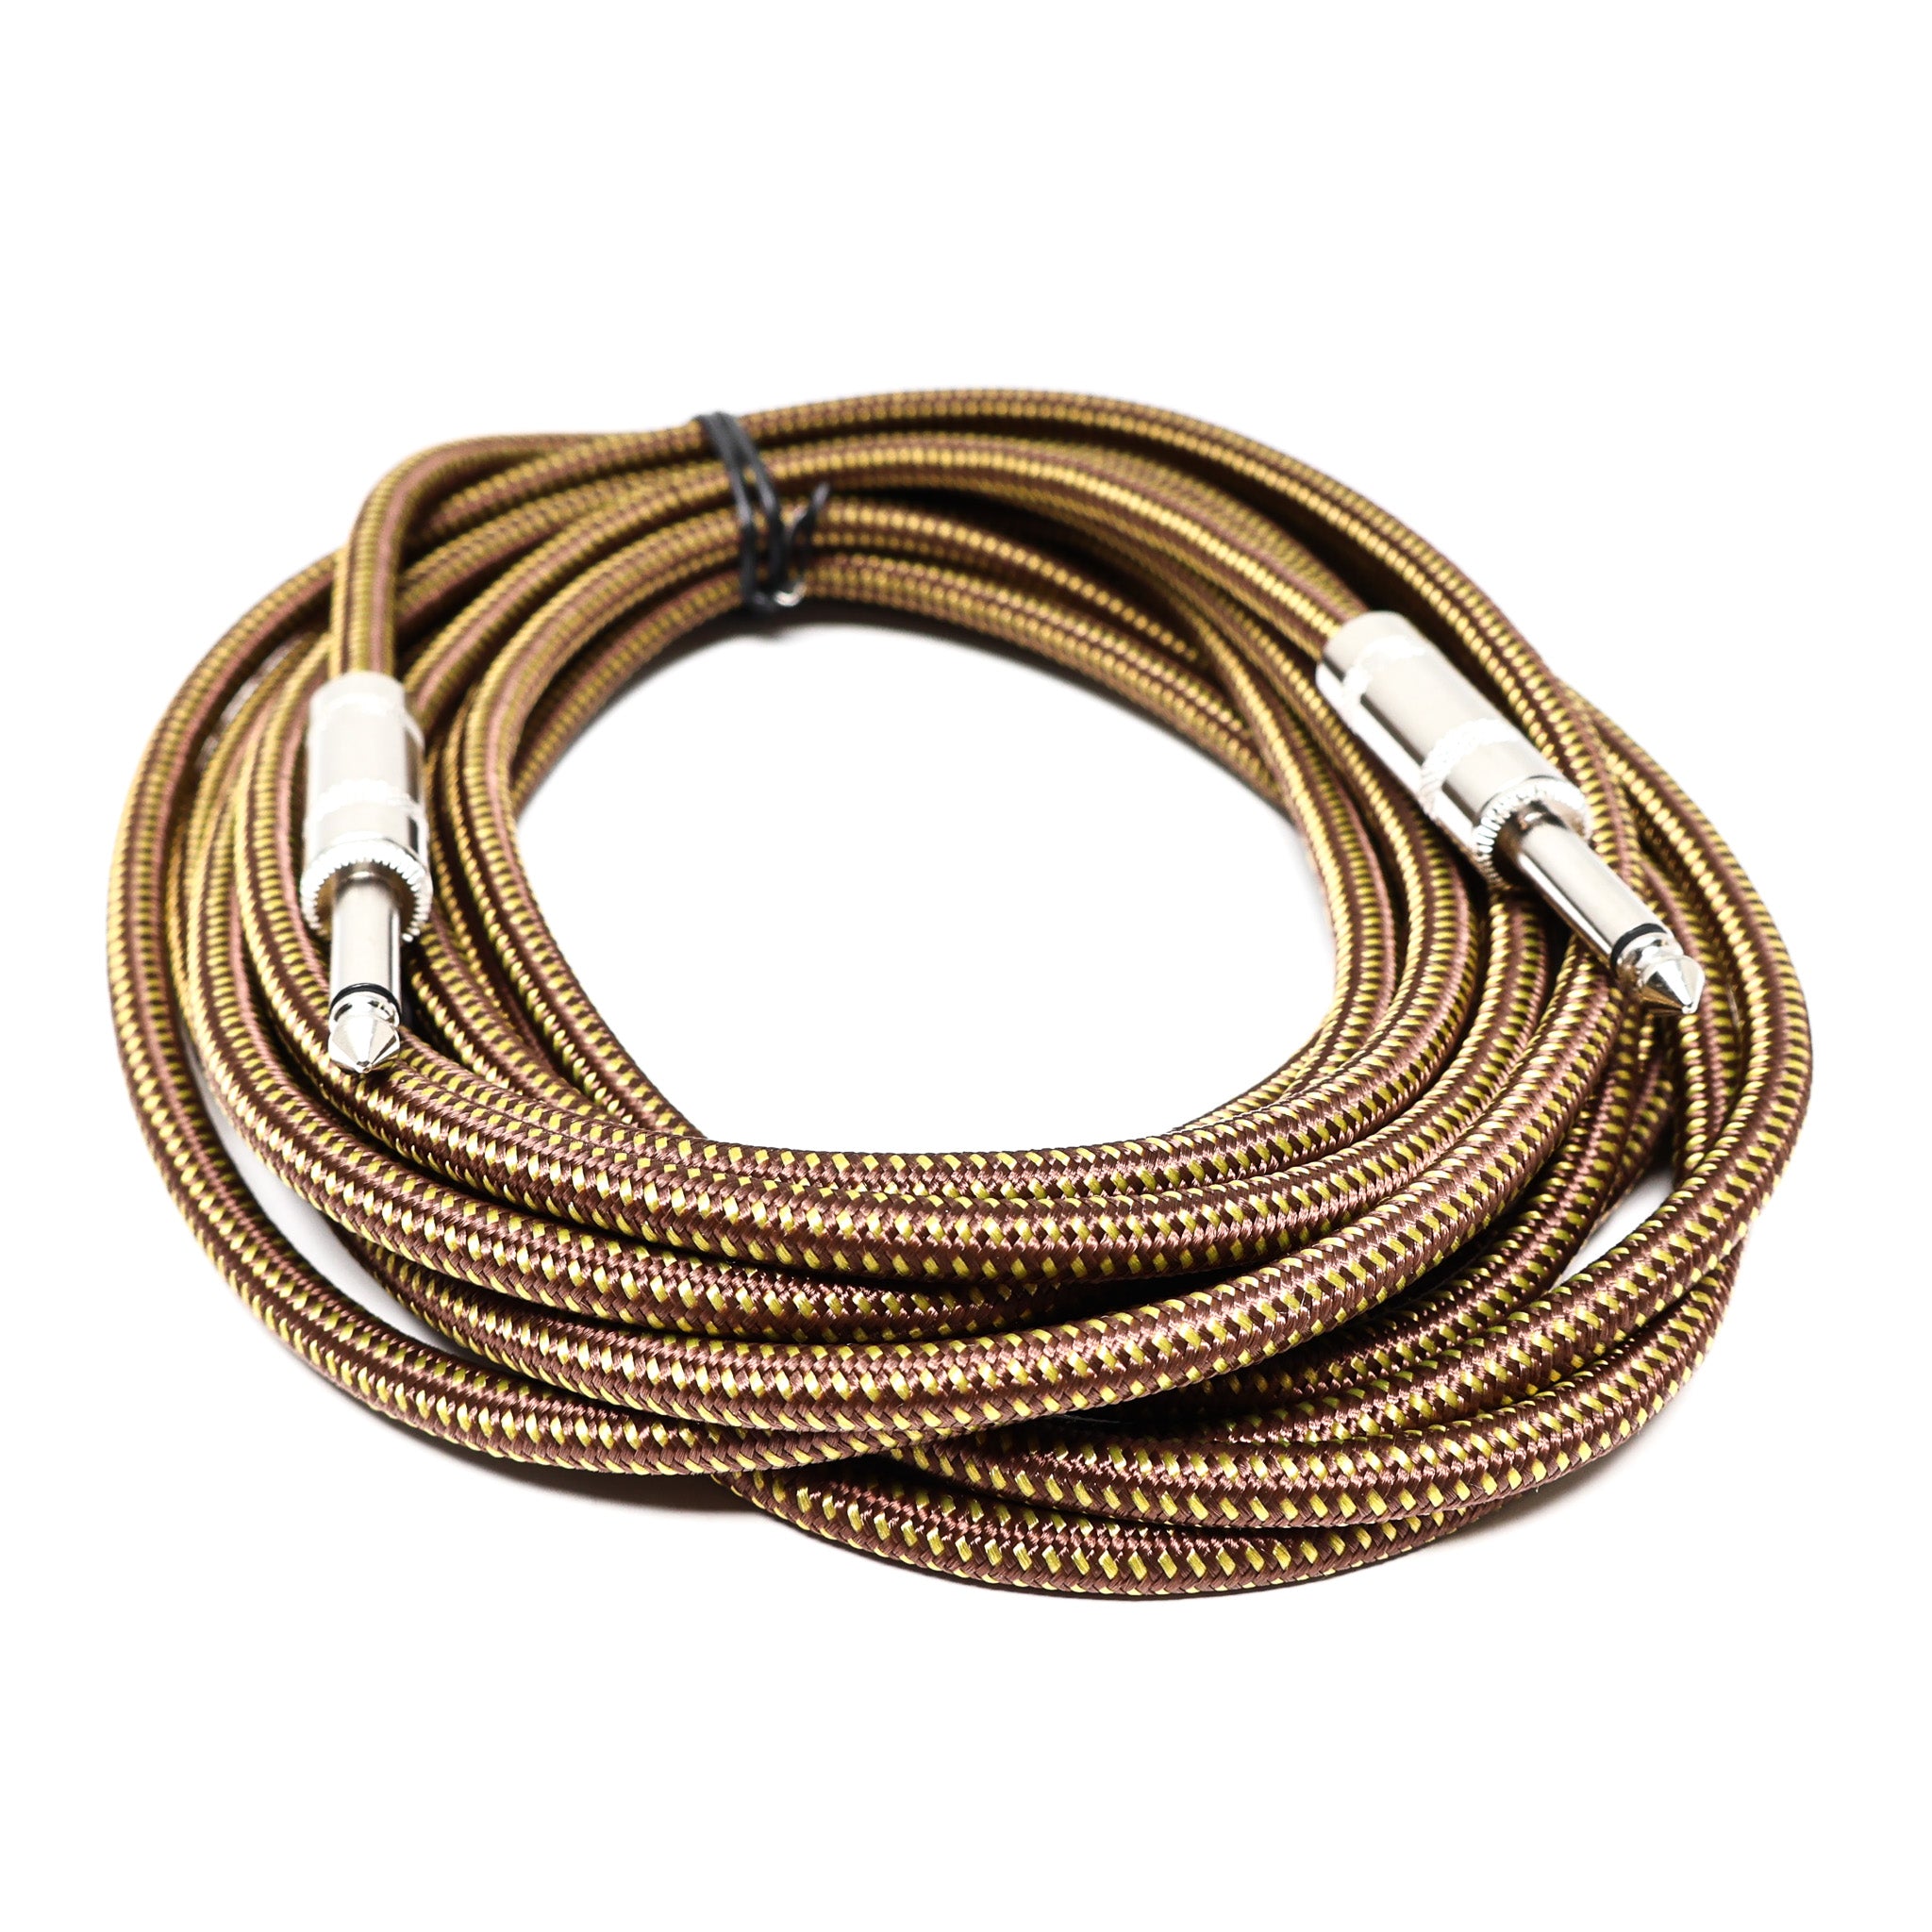 Professional Tweed Instrument Cable - 20 Feet